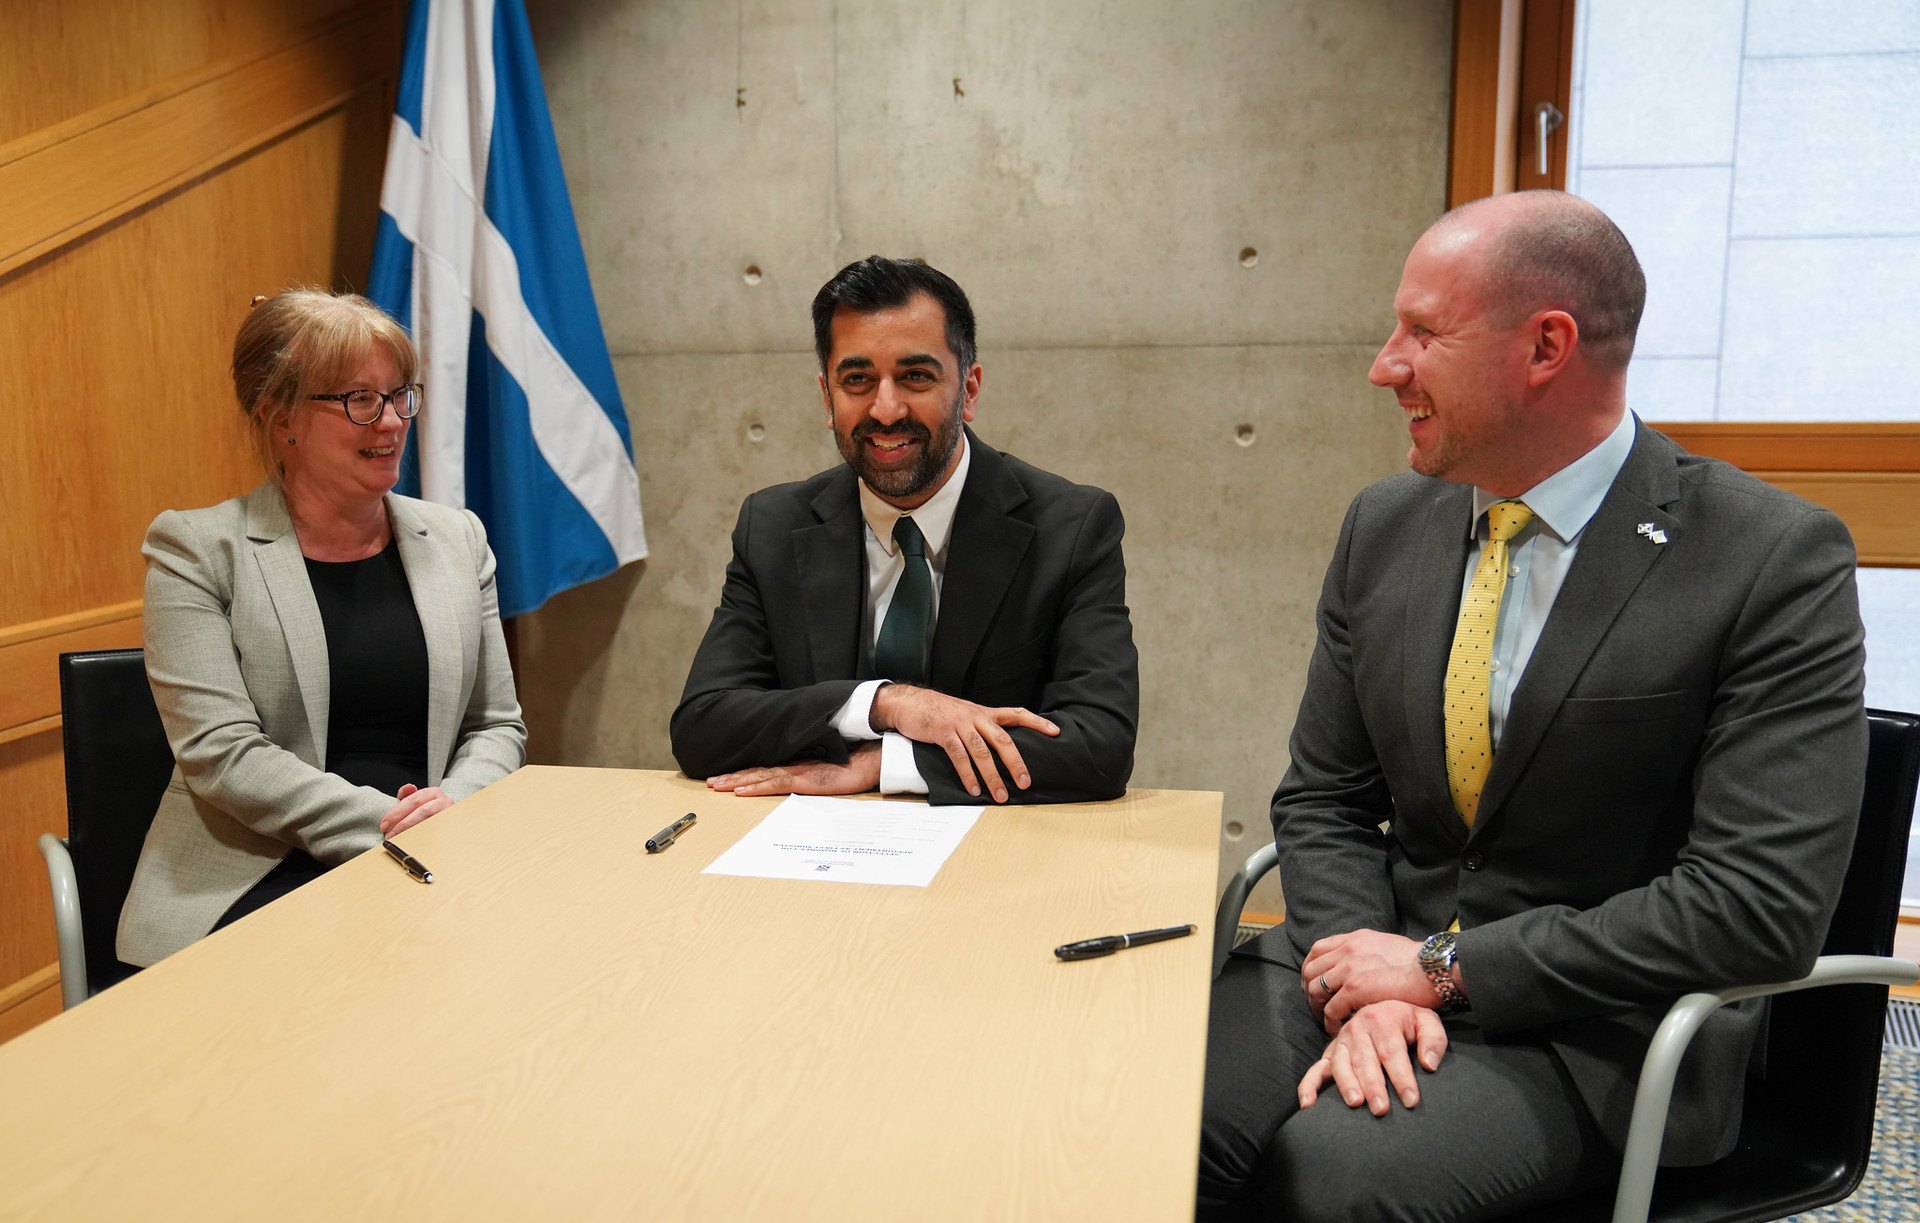 Humza Yousaf with Shona Robison and Neil Gray, the newly-appointed health secretary.